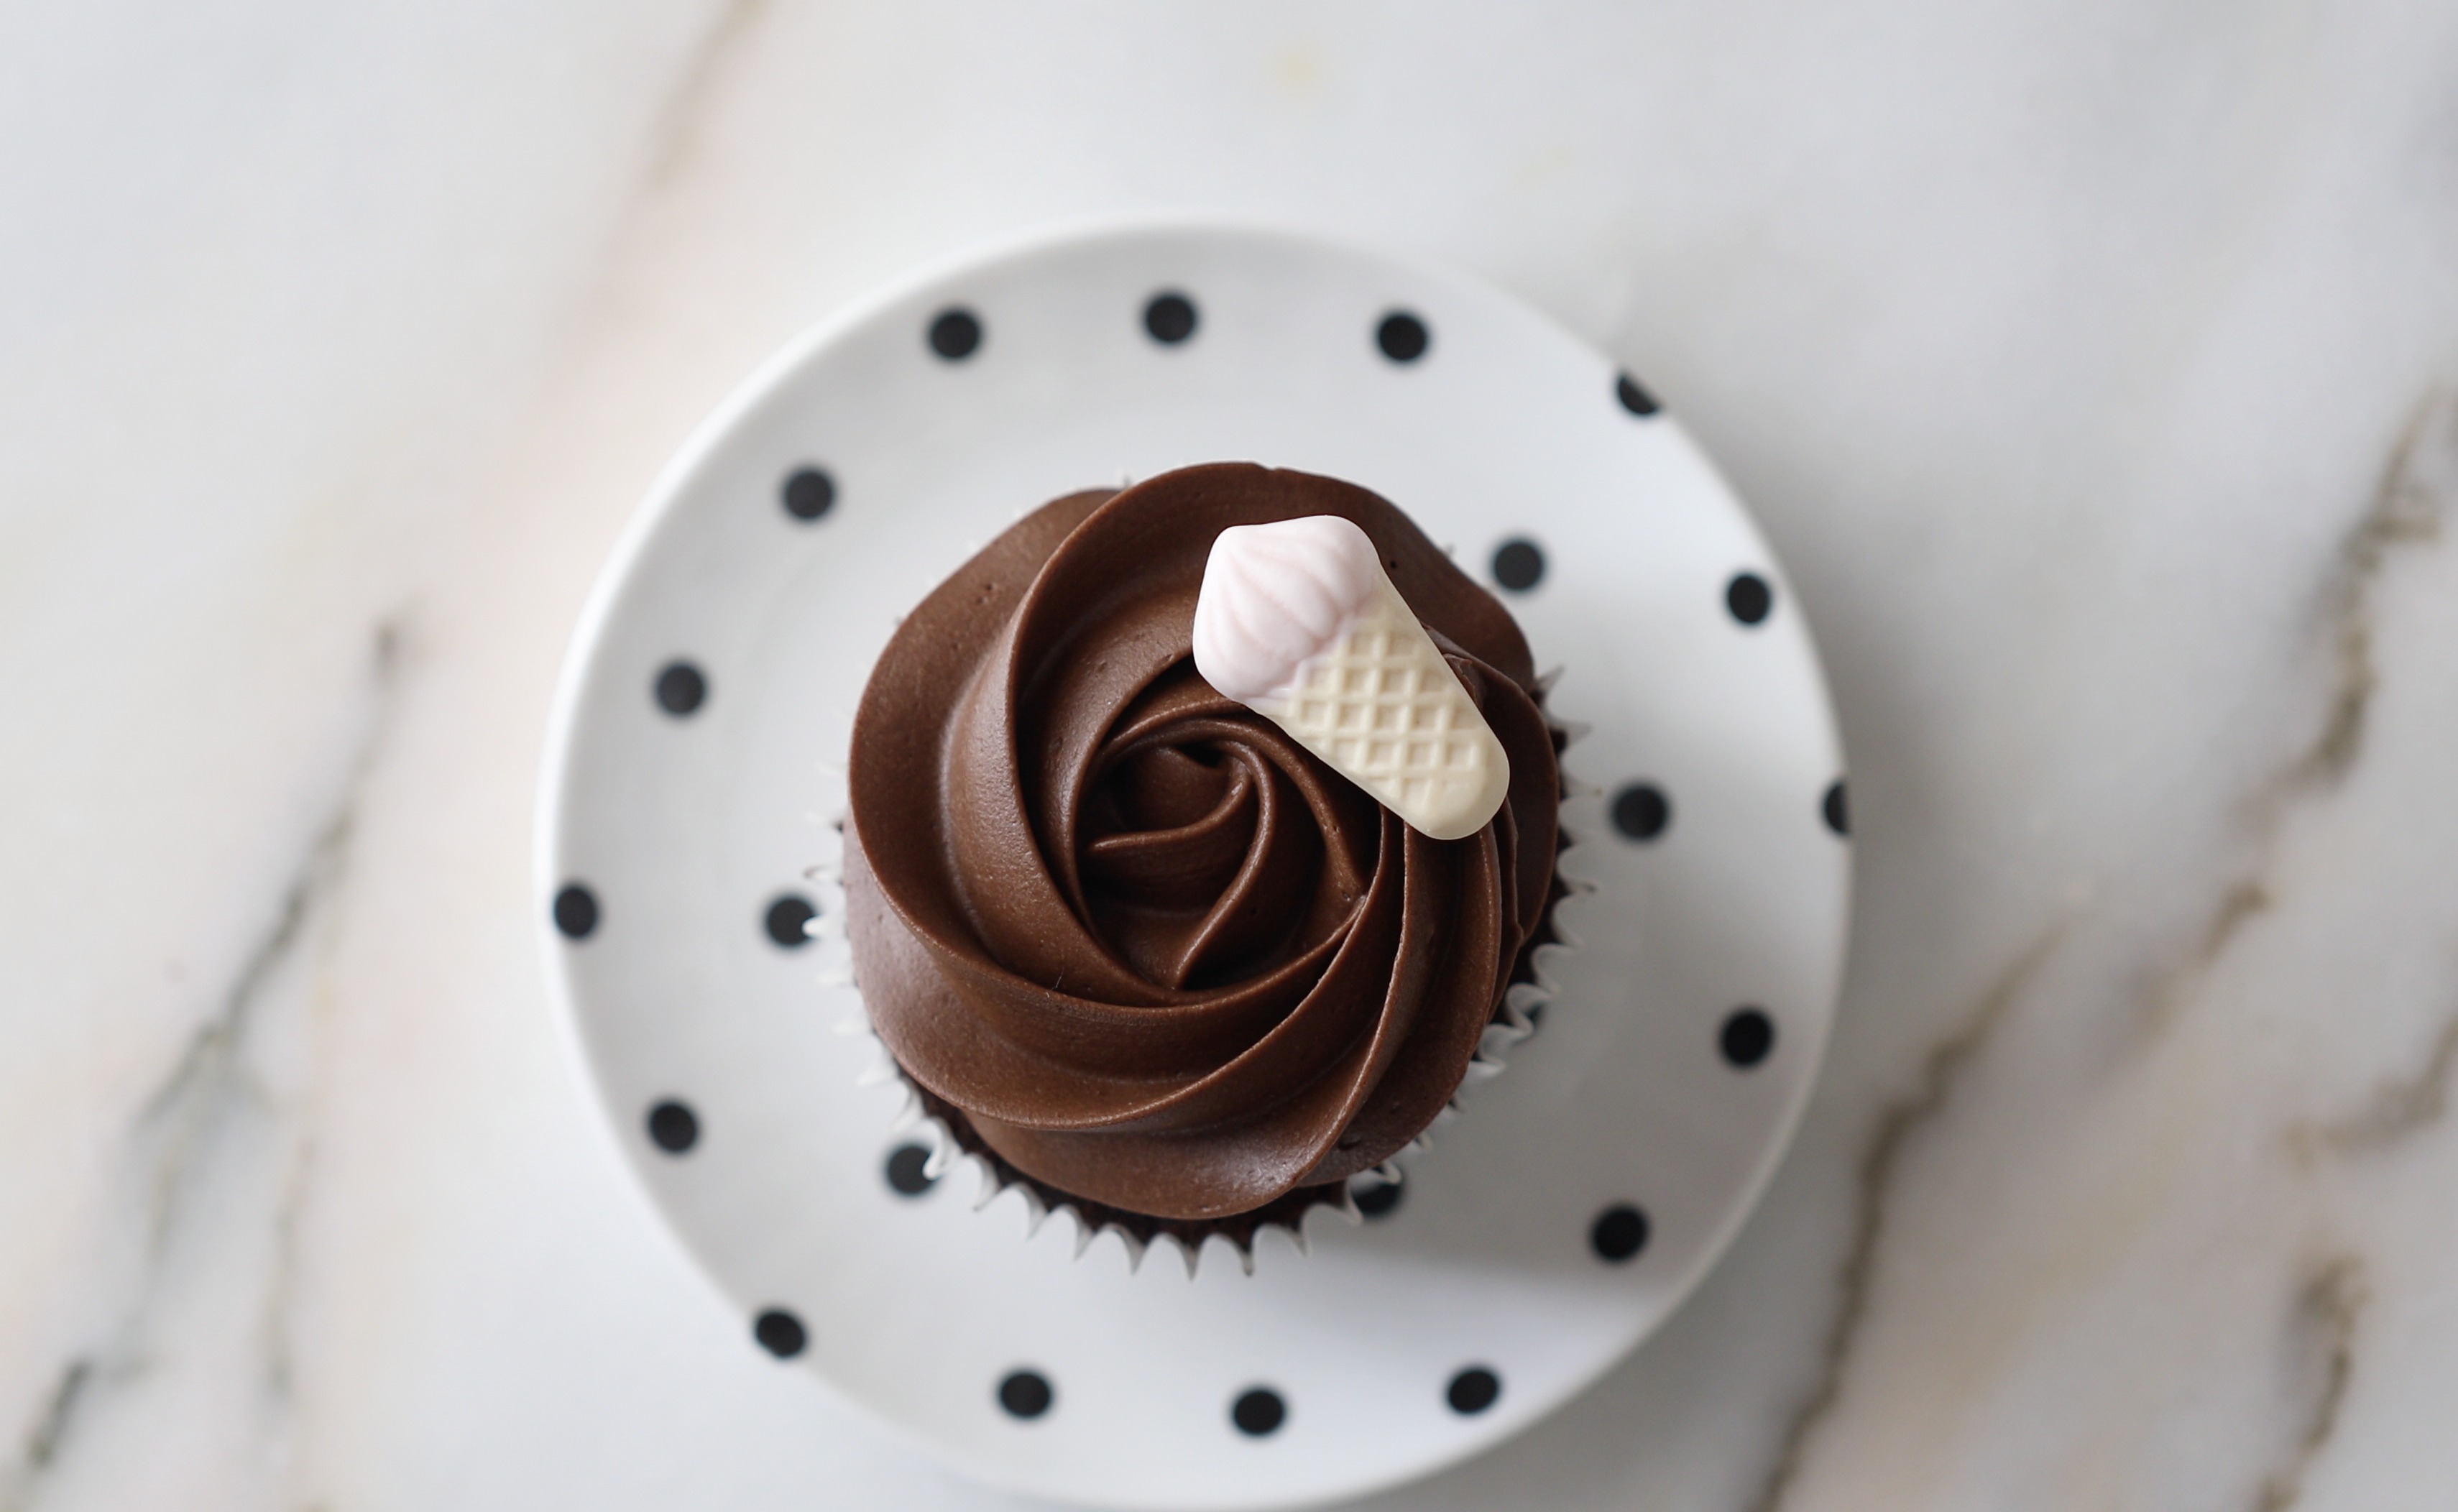 Triple chocolate cupcakes for valentines day For Baking :::GET INSPIRED